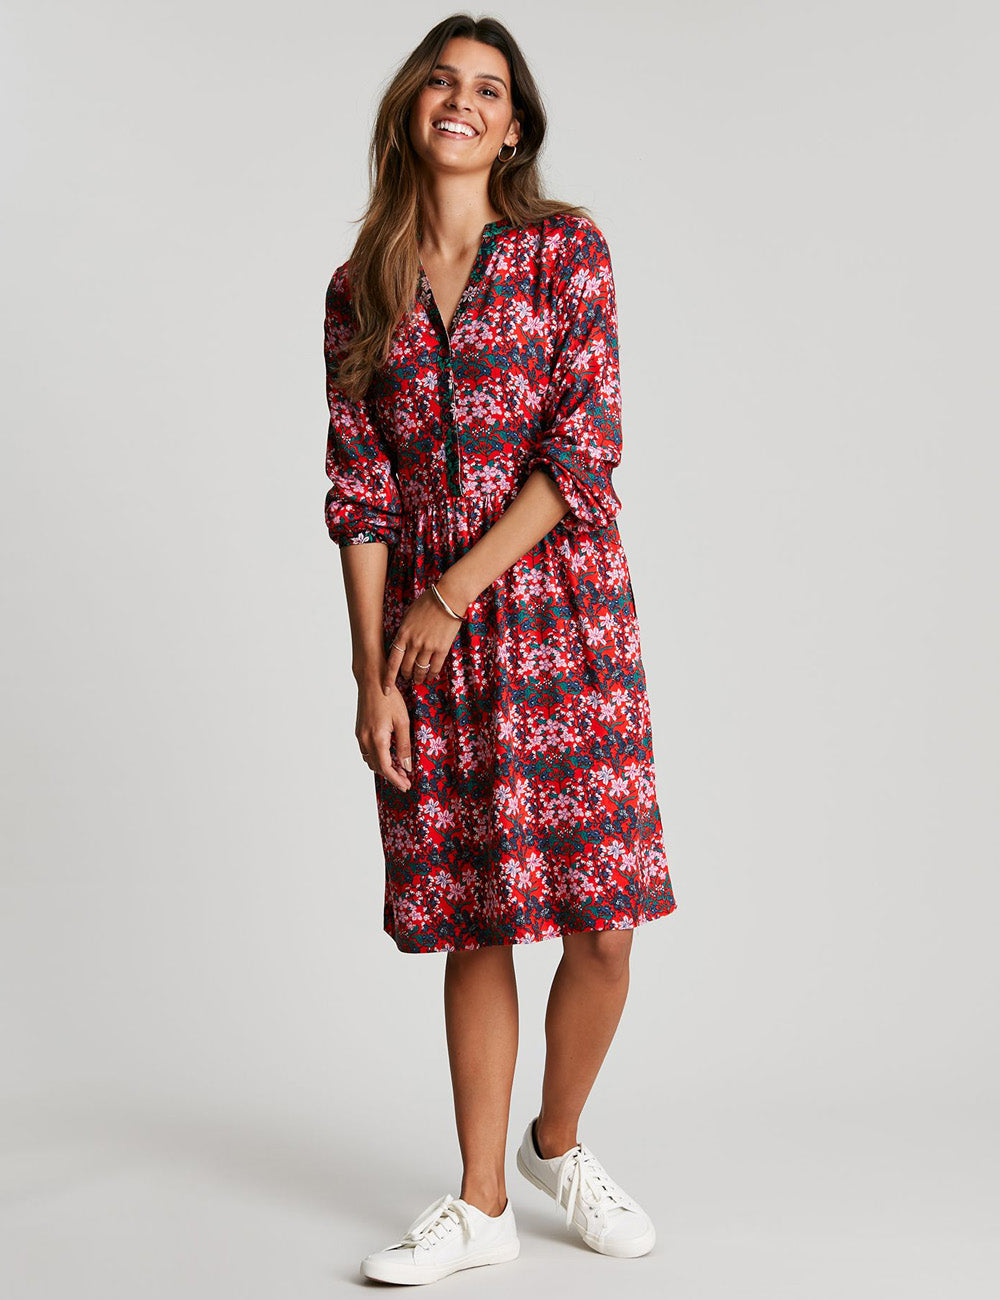 Joules Sophia Dress - Red Floral